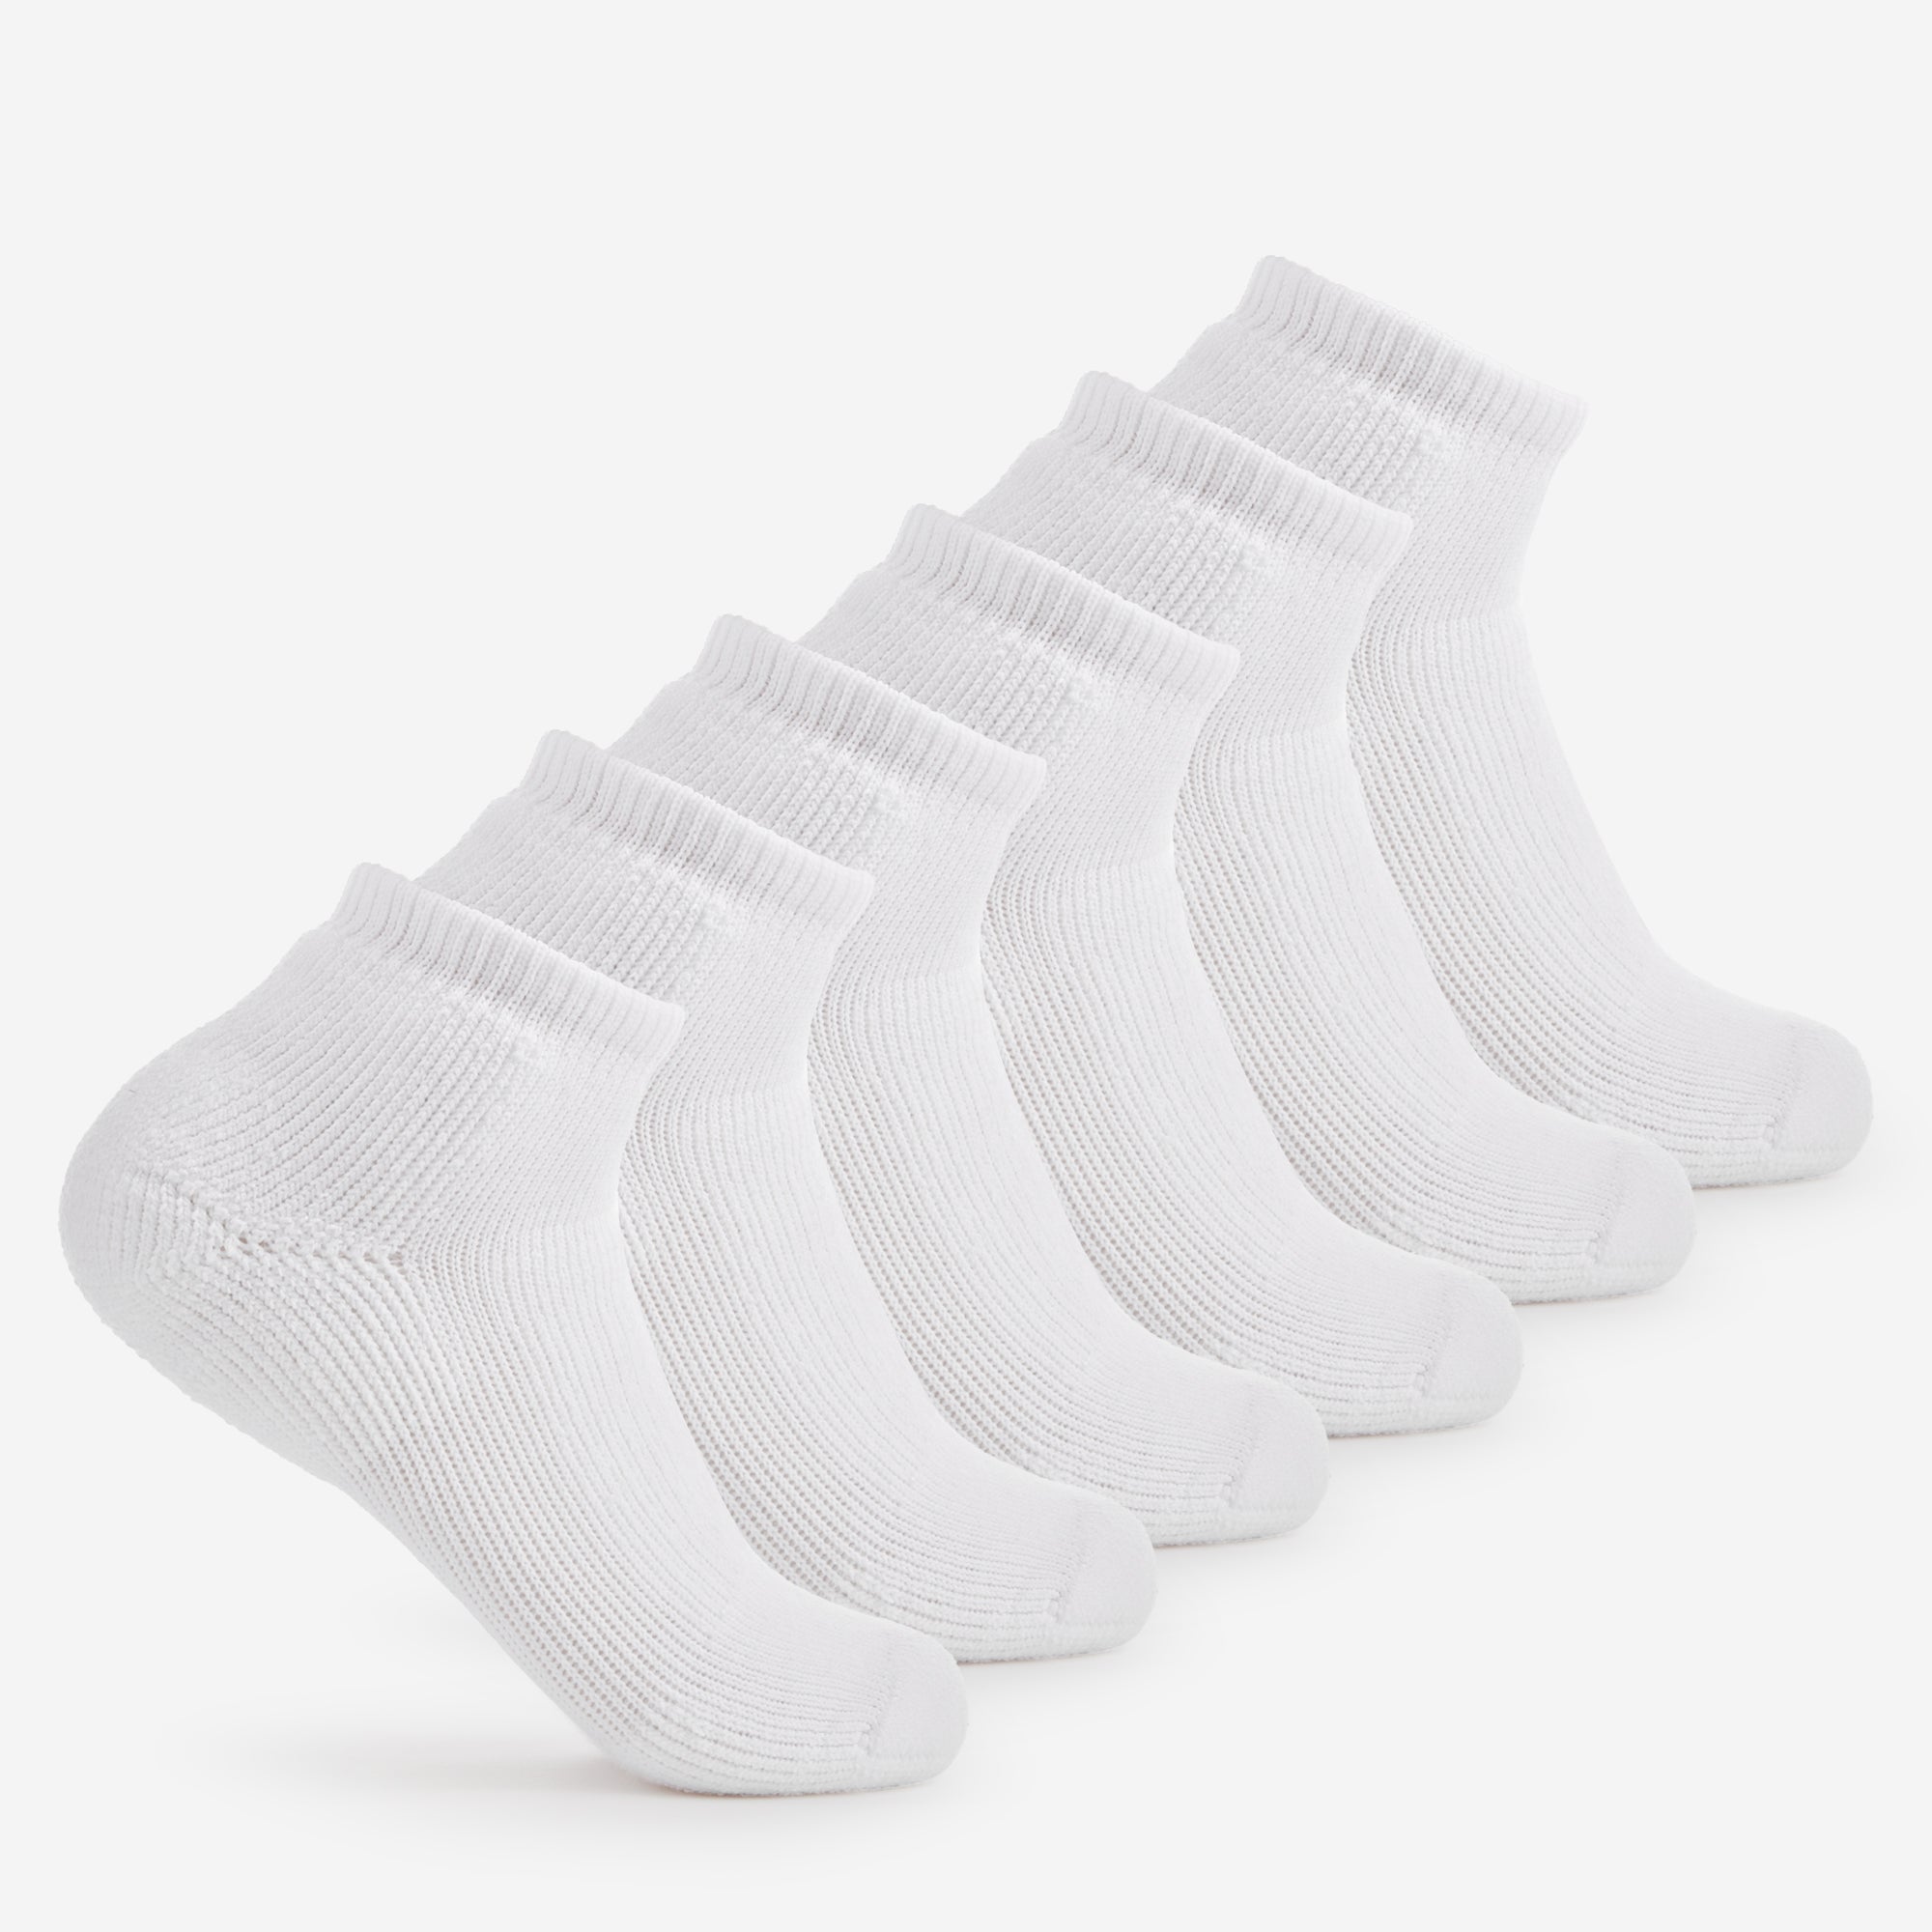 Thorlo - Moderate Cushion Low-Cut Walking Socks (6 Pack) , WMM , Pay For 5, Get 1 FREE!